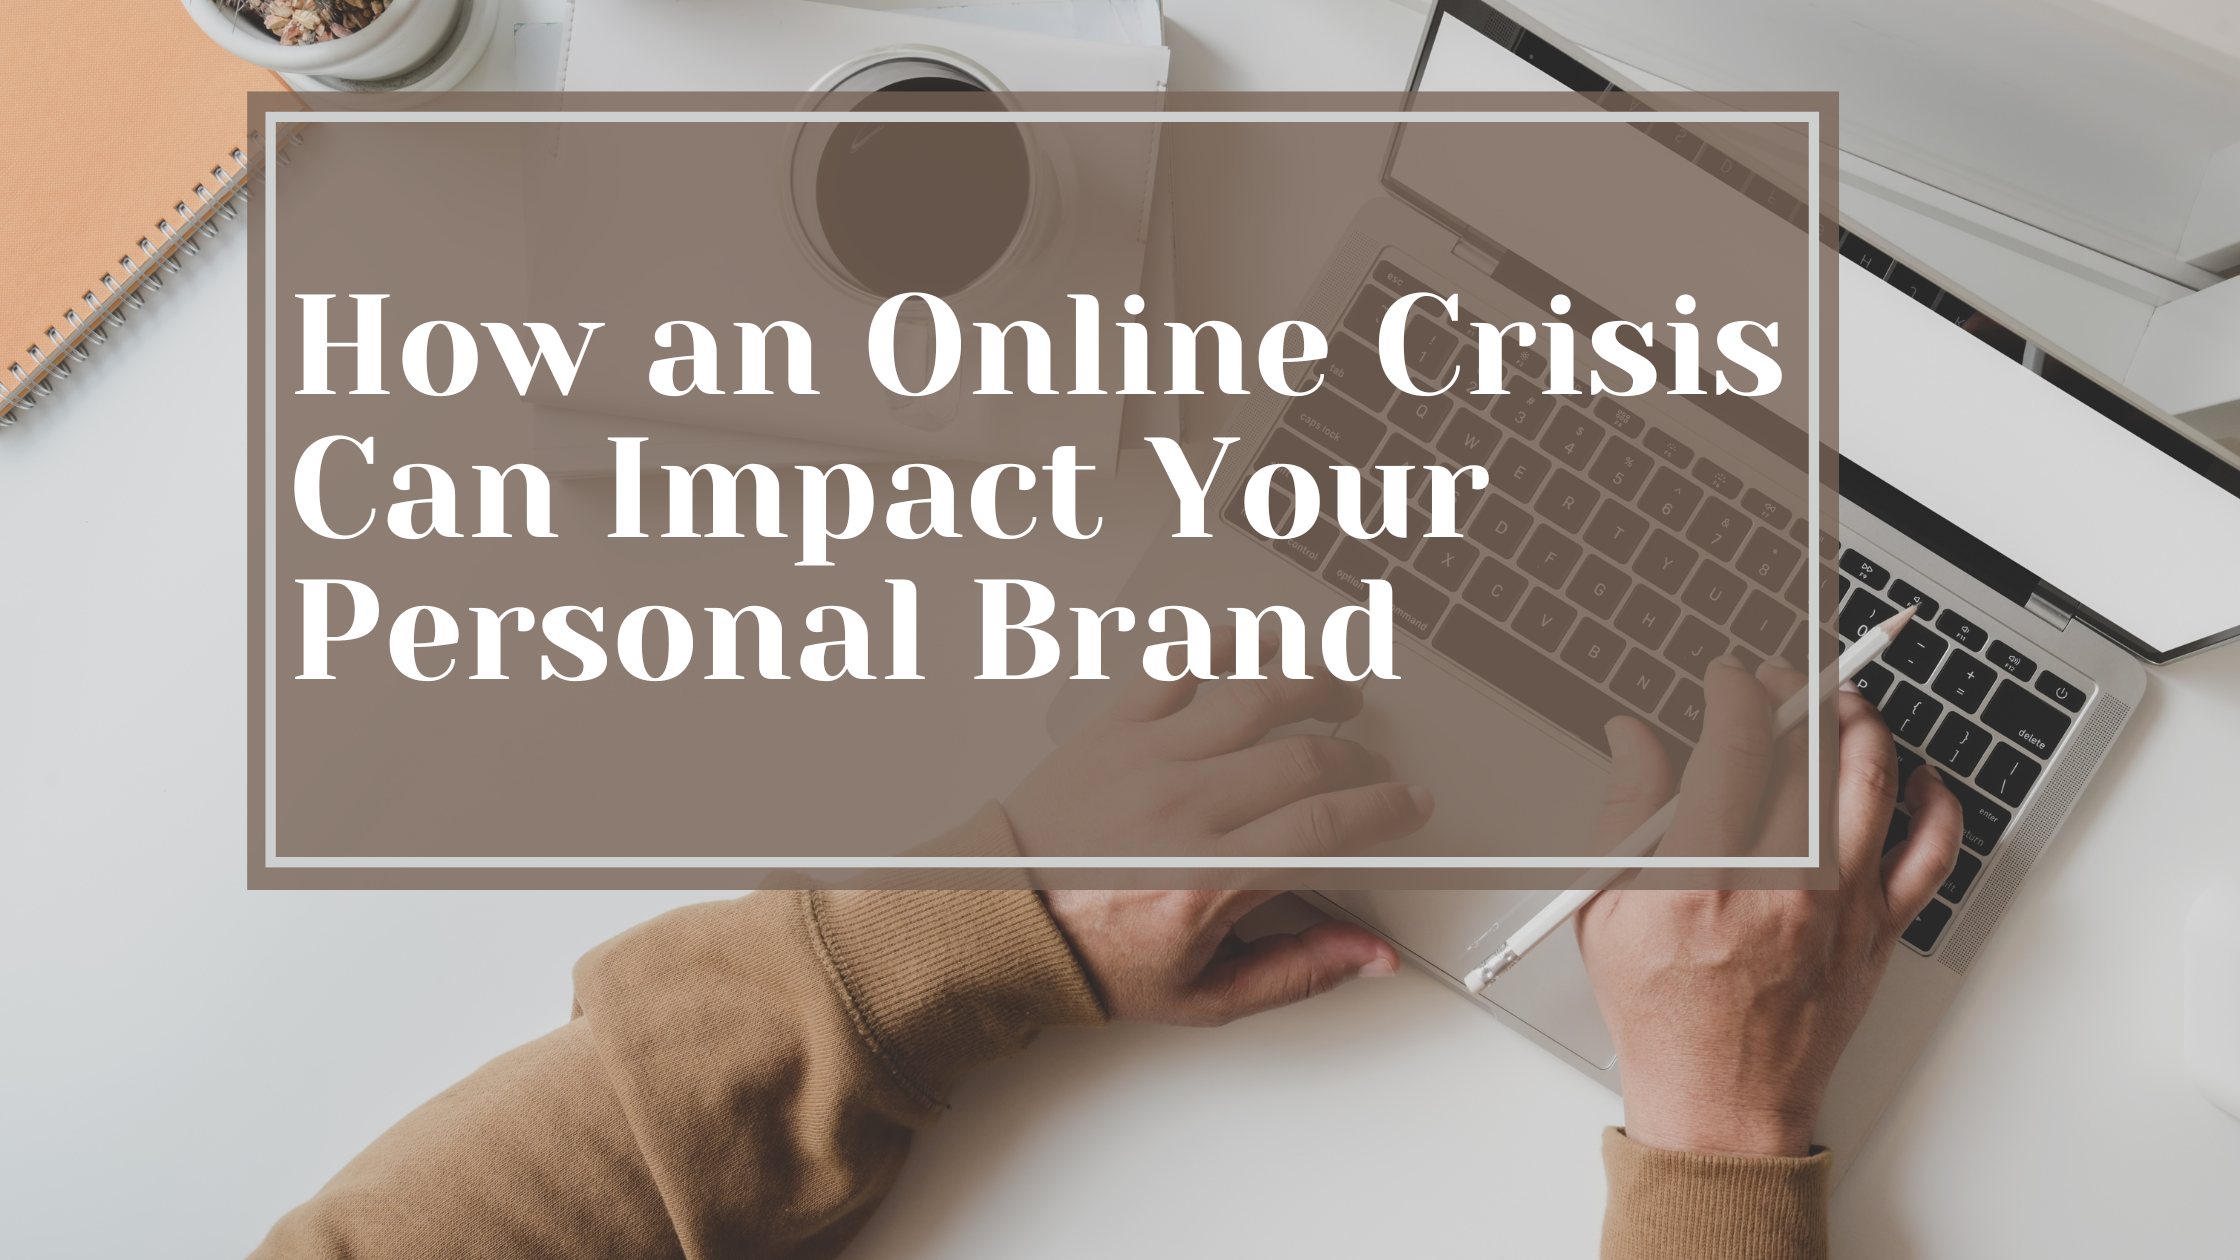 How an Online Crisis Can Impact Your Personal Brand